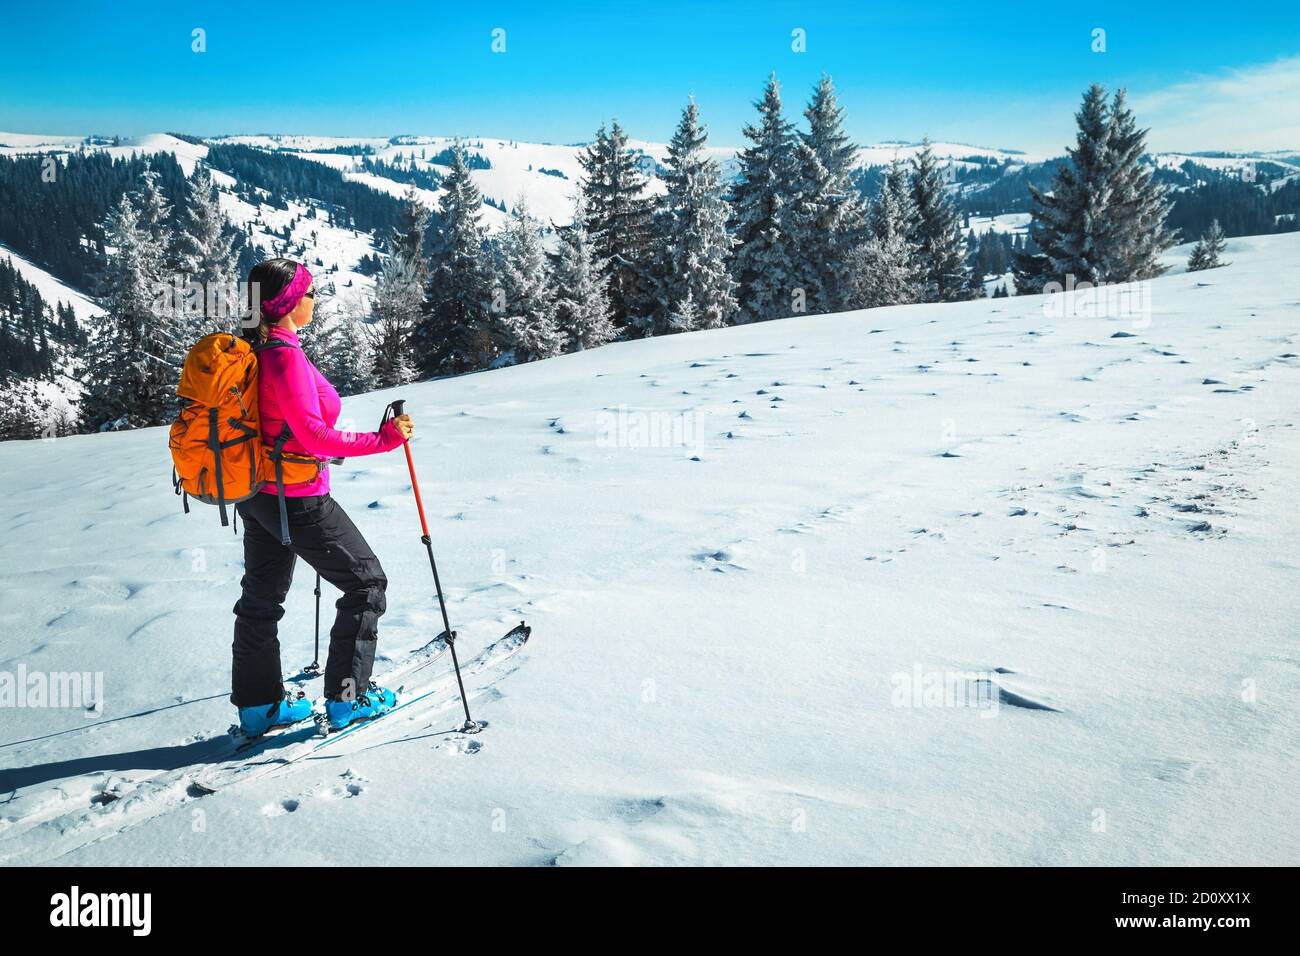 Backcountry skiing on the snowy hills. Sporty happy woman with colorful backpack, ski touring in the powder snow and enjoying the view, Carpathians, T Stock Photo